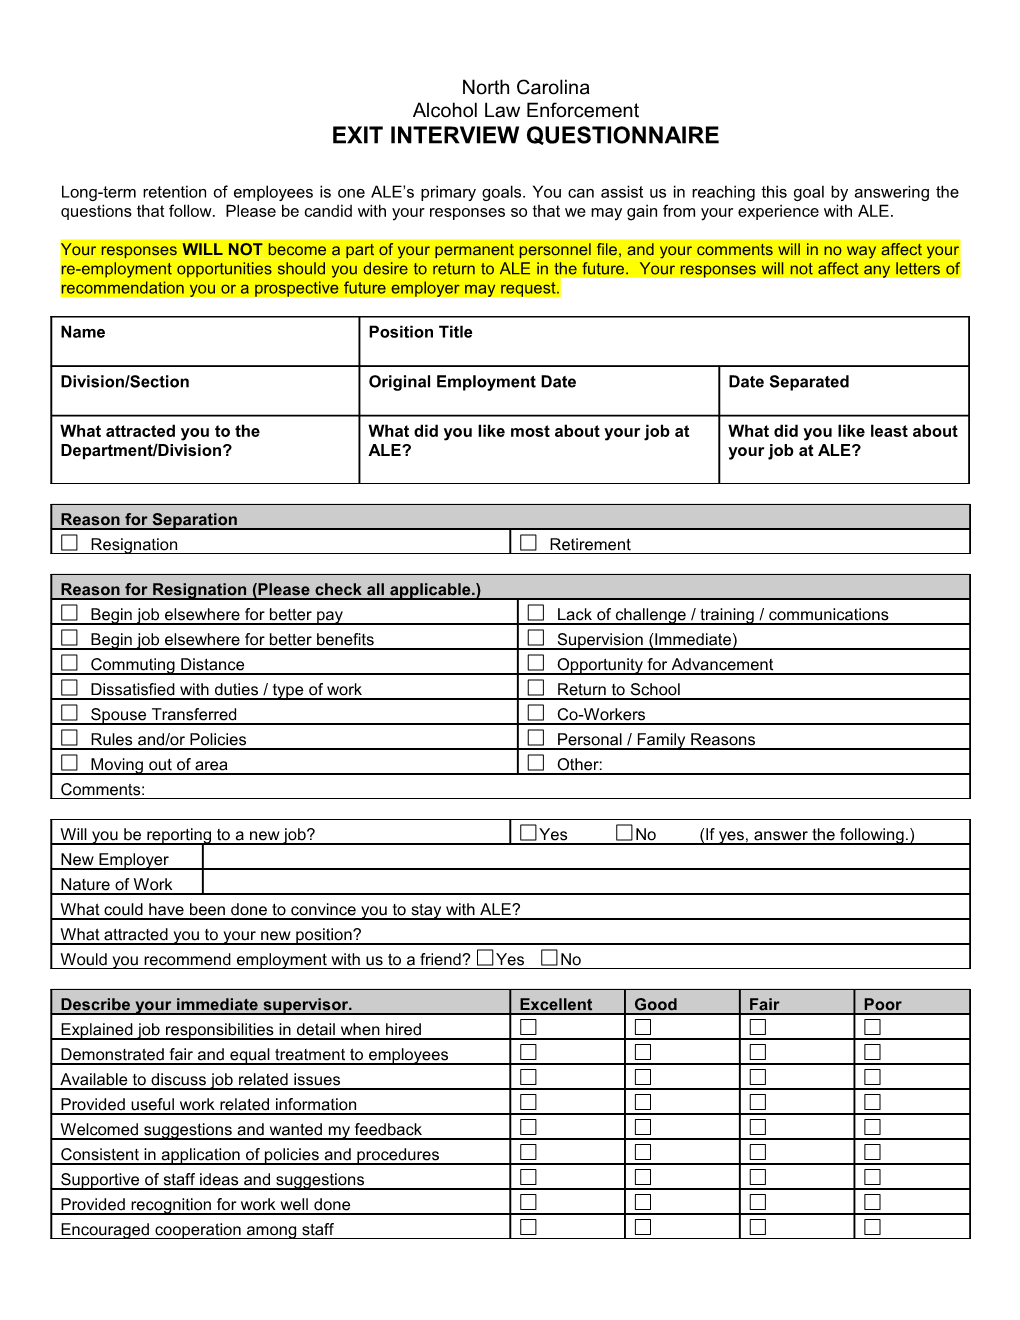 HP-XX Voluntary Exit Interview Questionnaire